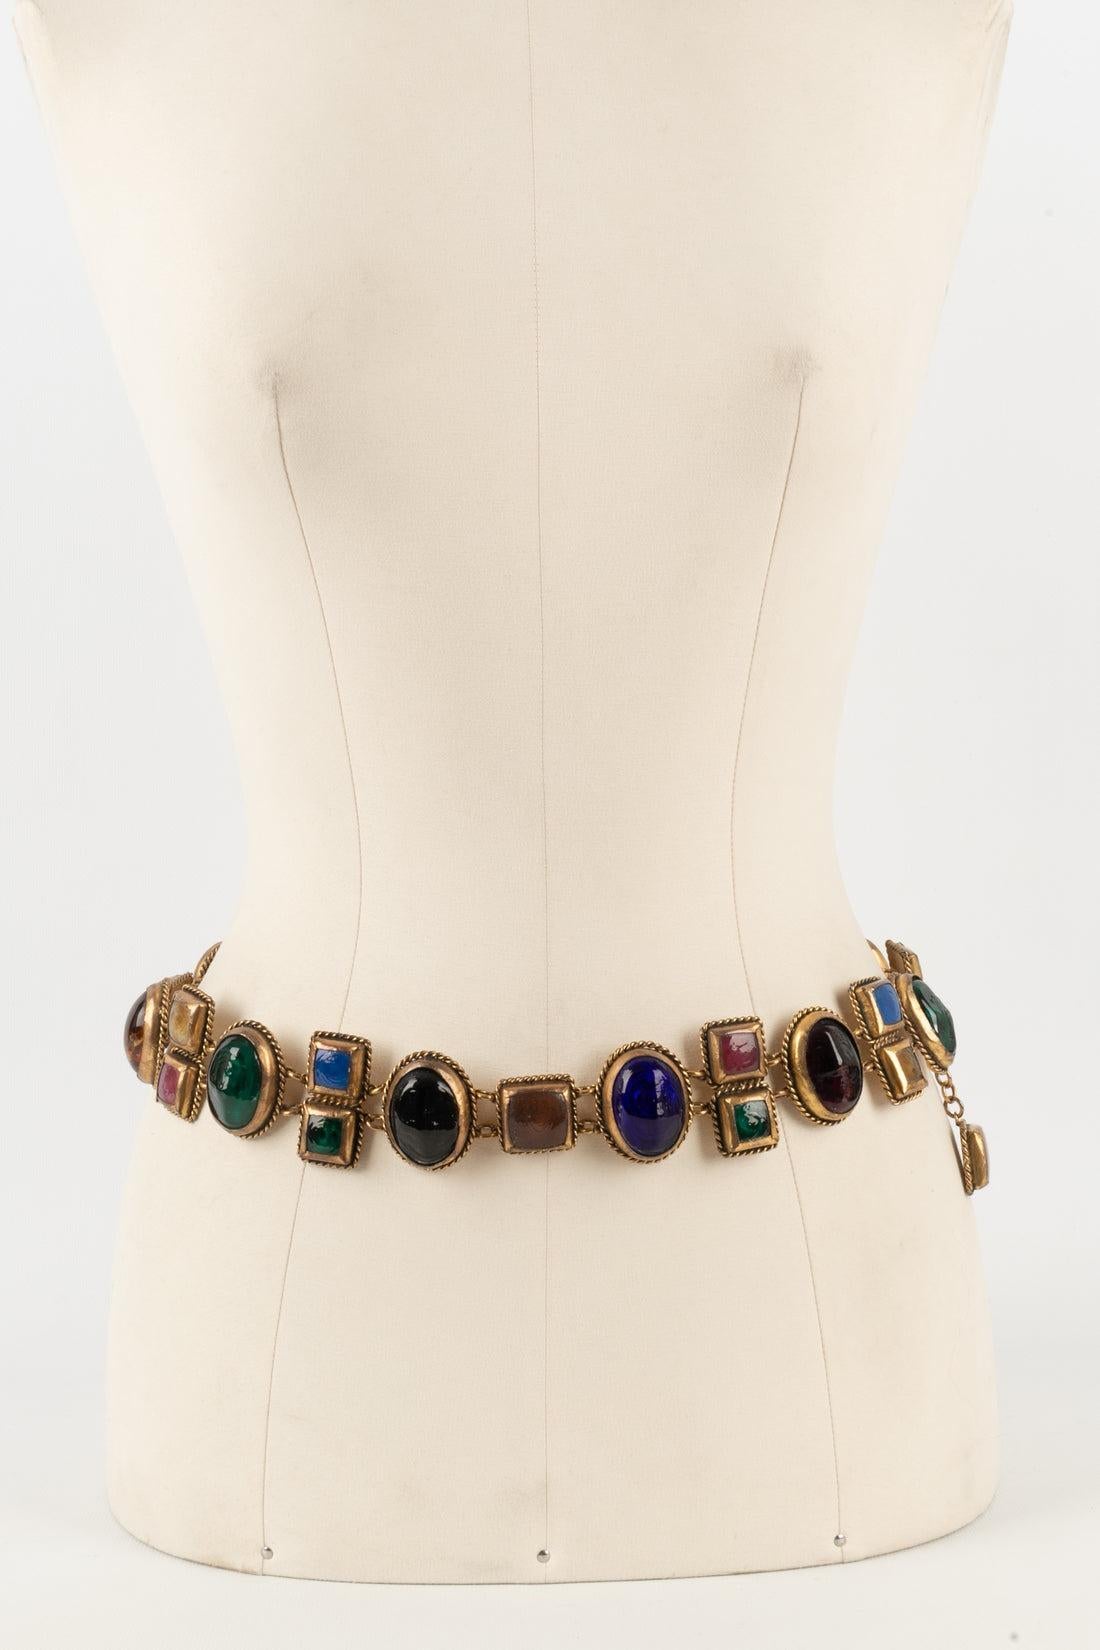 Chanel - Impressive golden metal belt inspired by the Byzantine style, ornamented with multicolored glass paste cabochons. Haute Couture Collection. Not signed creation from the Denez atelier for the House of Chanel.

Additional